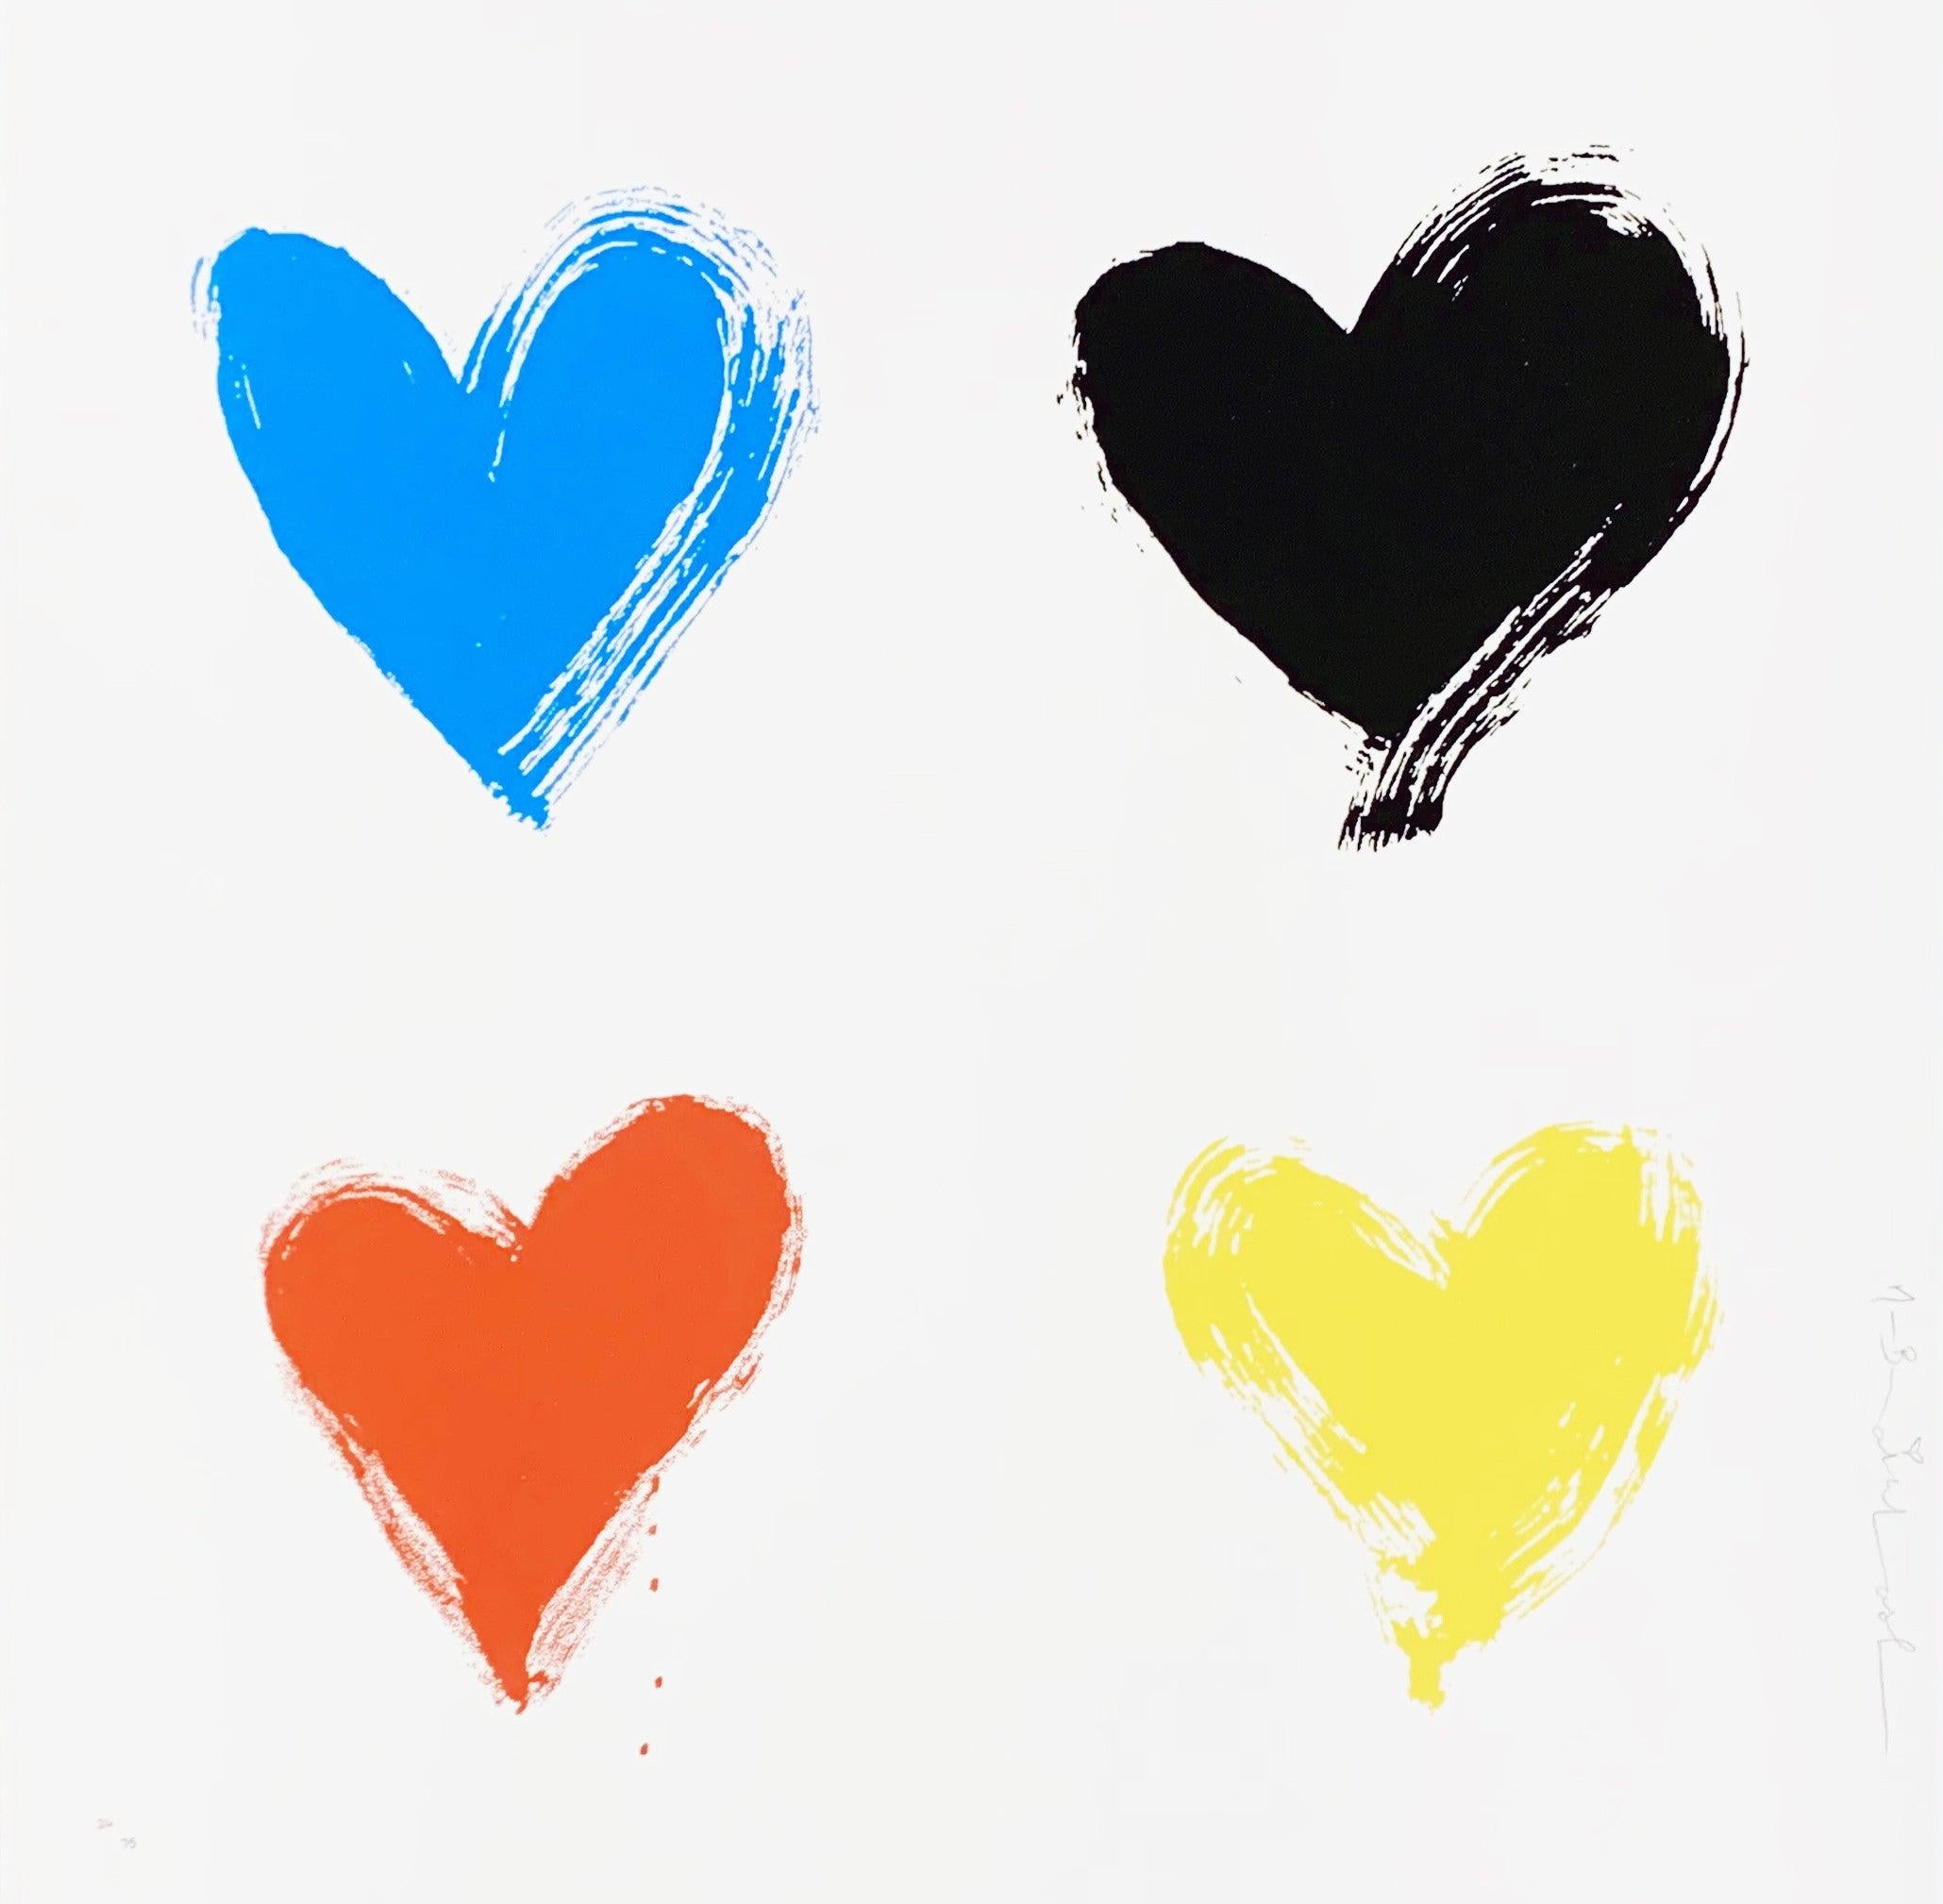 Mr. Brainwash Abstract Print - All You Need is He(Art)